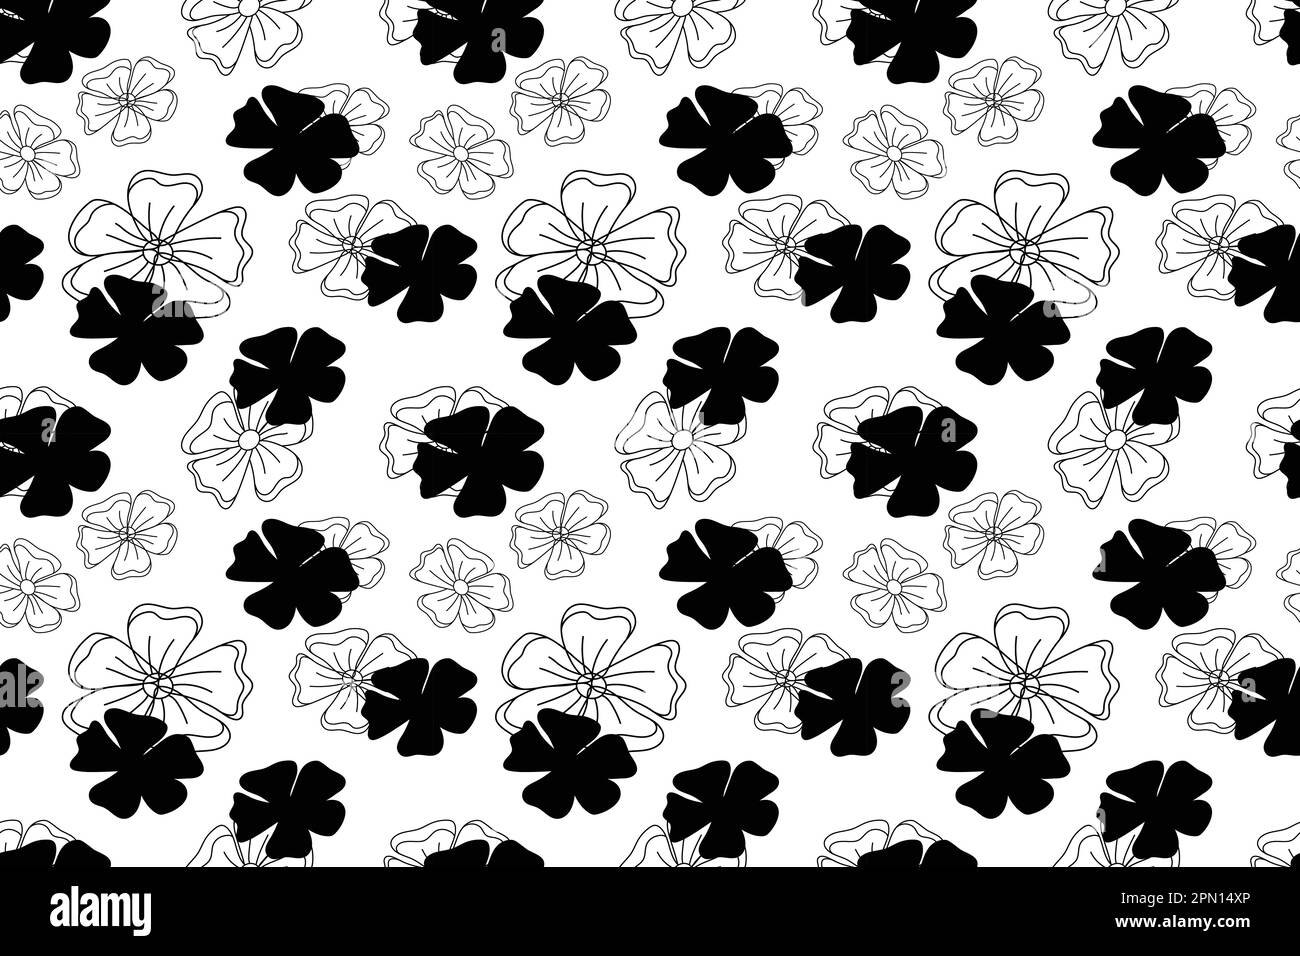 Vintage floral pattern. White and black line art leaves. Floral seamless background. An elegant template for fashionable fabric prints. Vector illustration Stock Vector